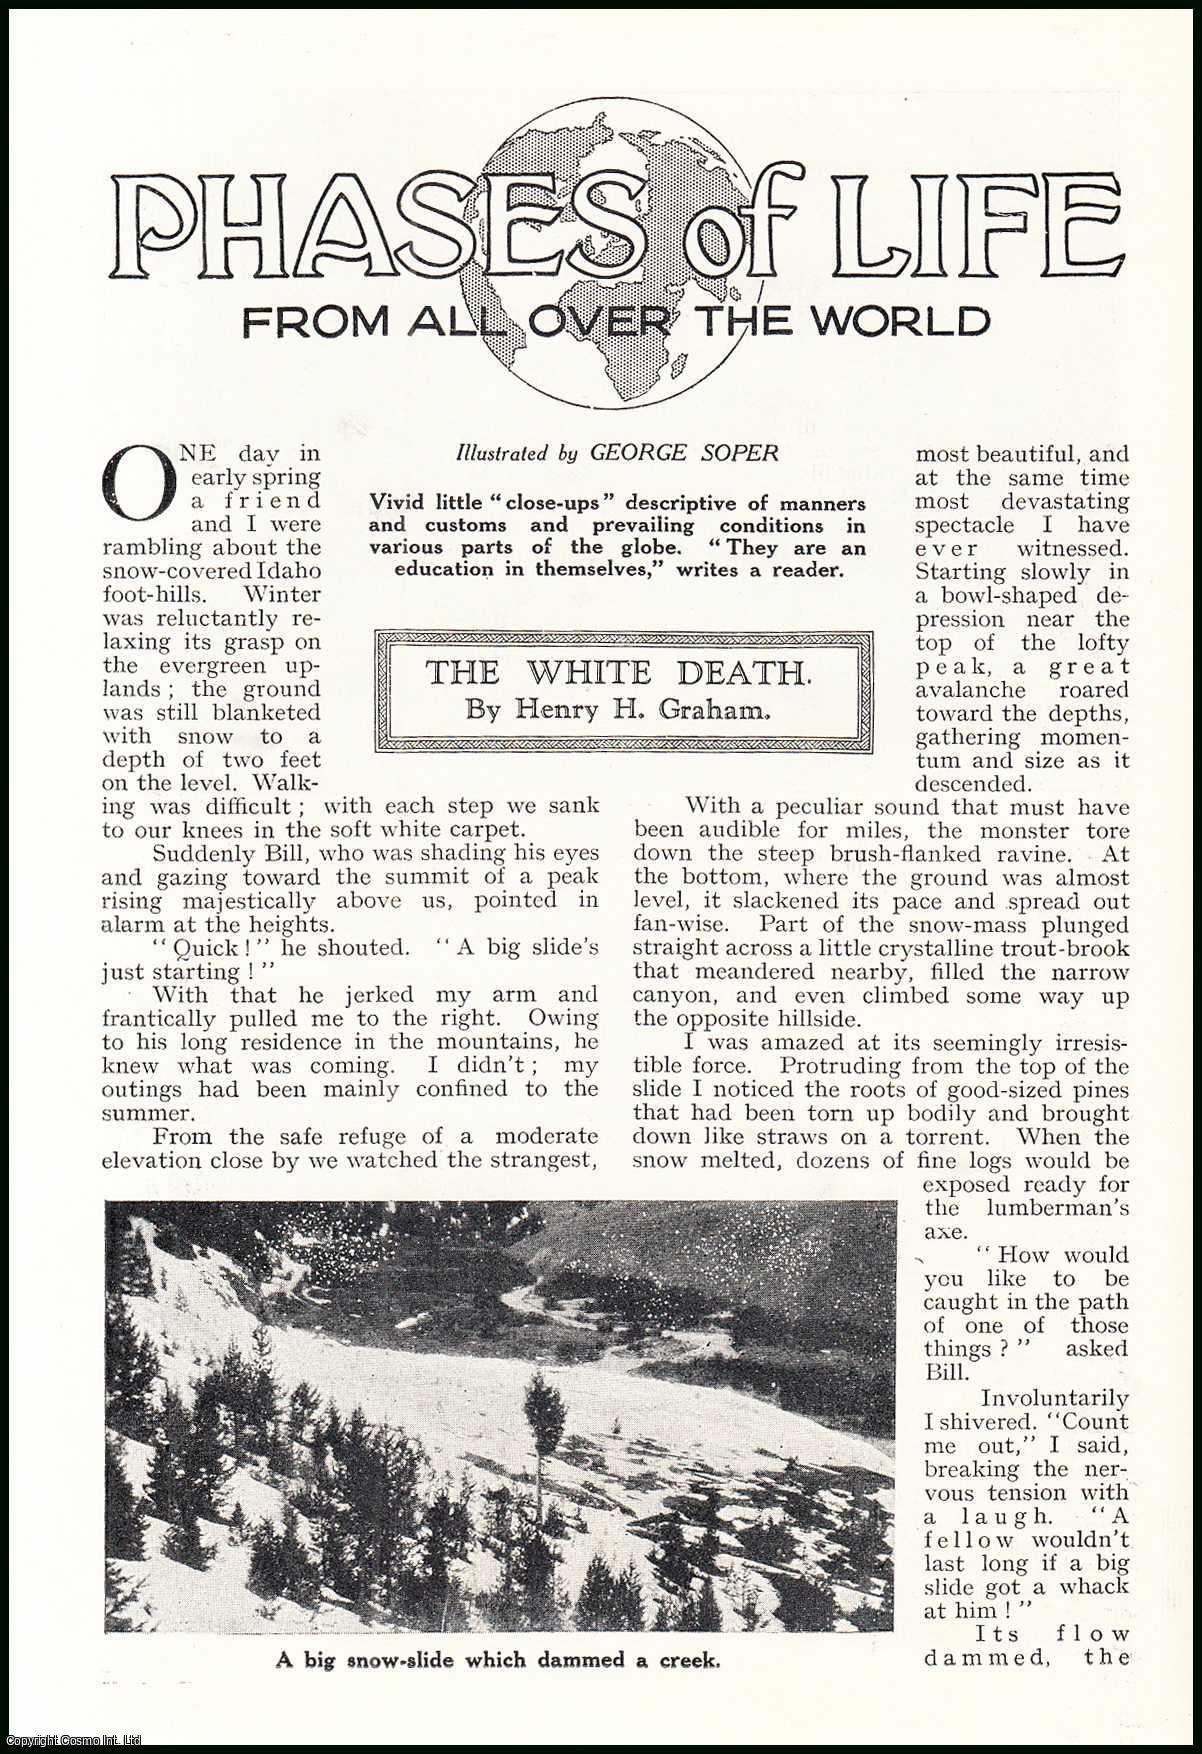 Henry H. Graham. Illustrated by George Soper. - The White Death : snow slides in the Idaho foot-hills. An uncommon original article from the Wide World Magazine, 1936.